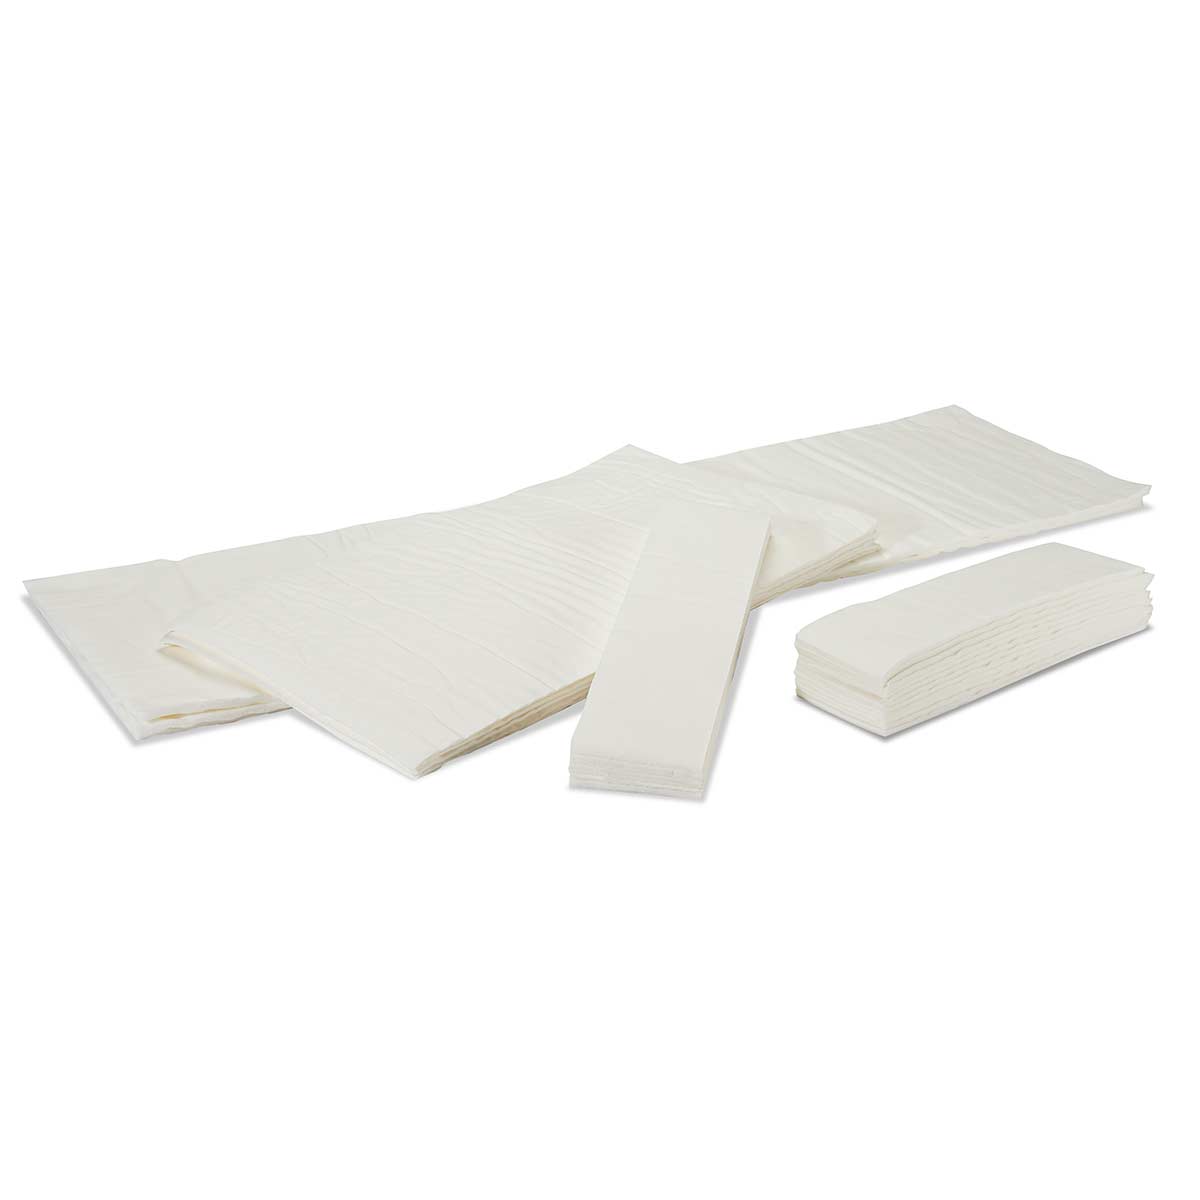 Pads - Absorbent Specialty Products